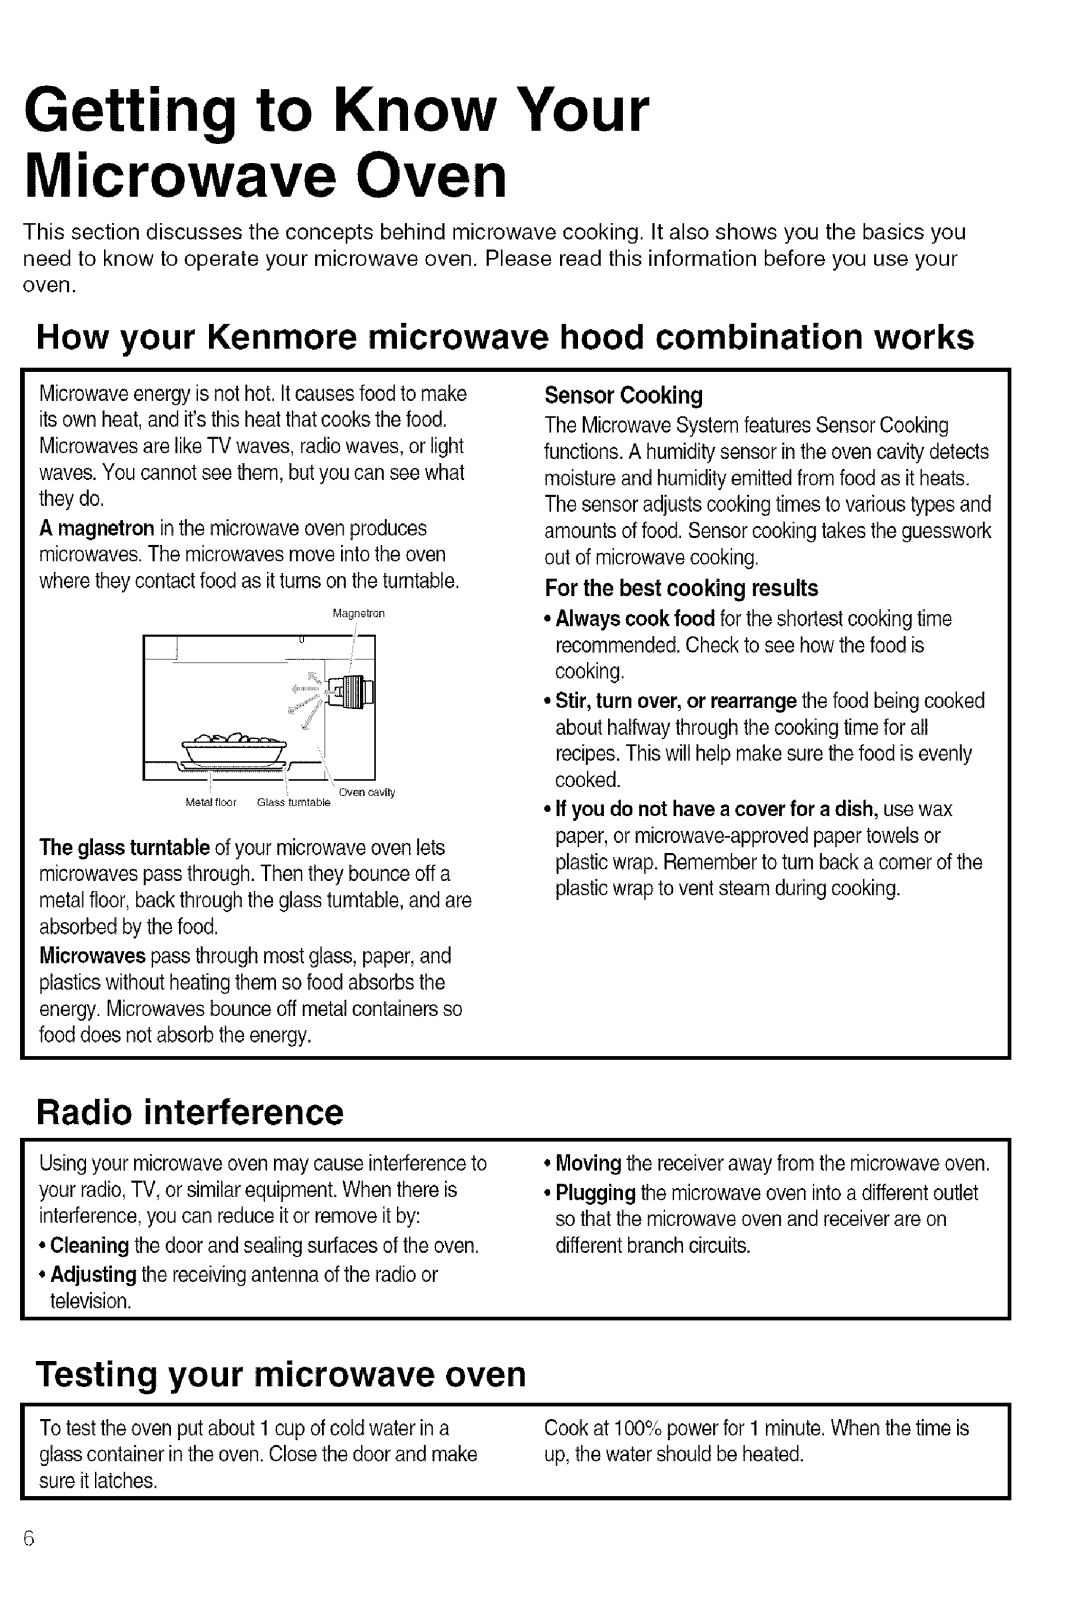 Kenmore 721.80609 manual Testing your microwave oven, How your Kenmore microwave hood combination works, Radio interference 